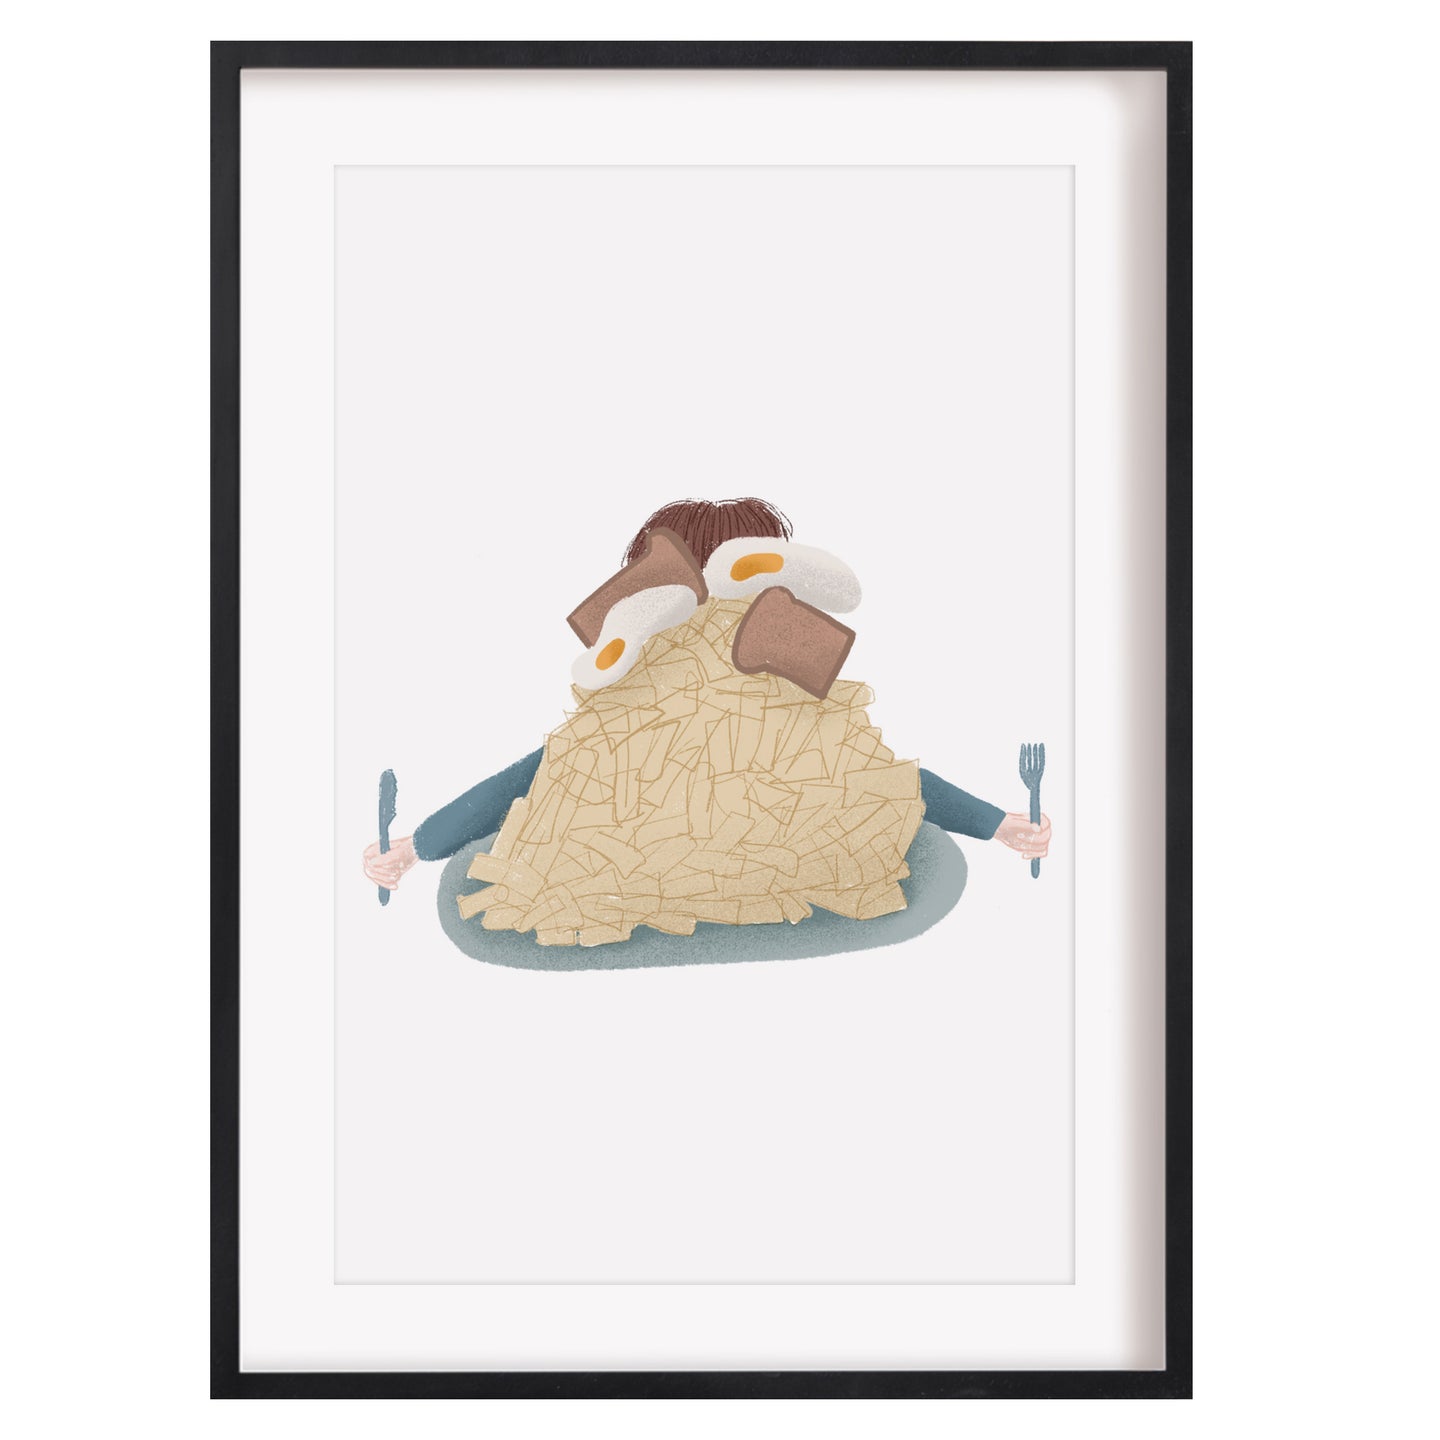 Chips and egg art print